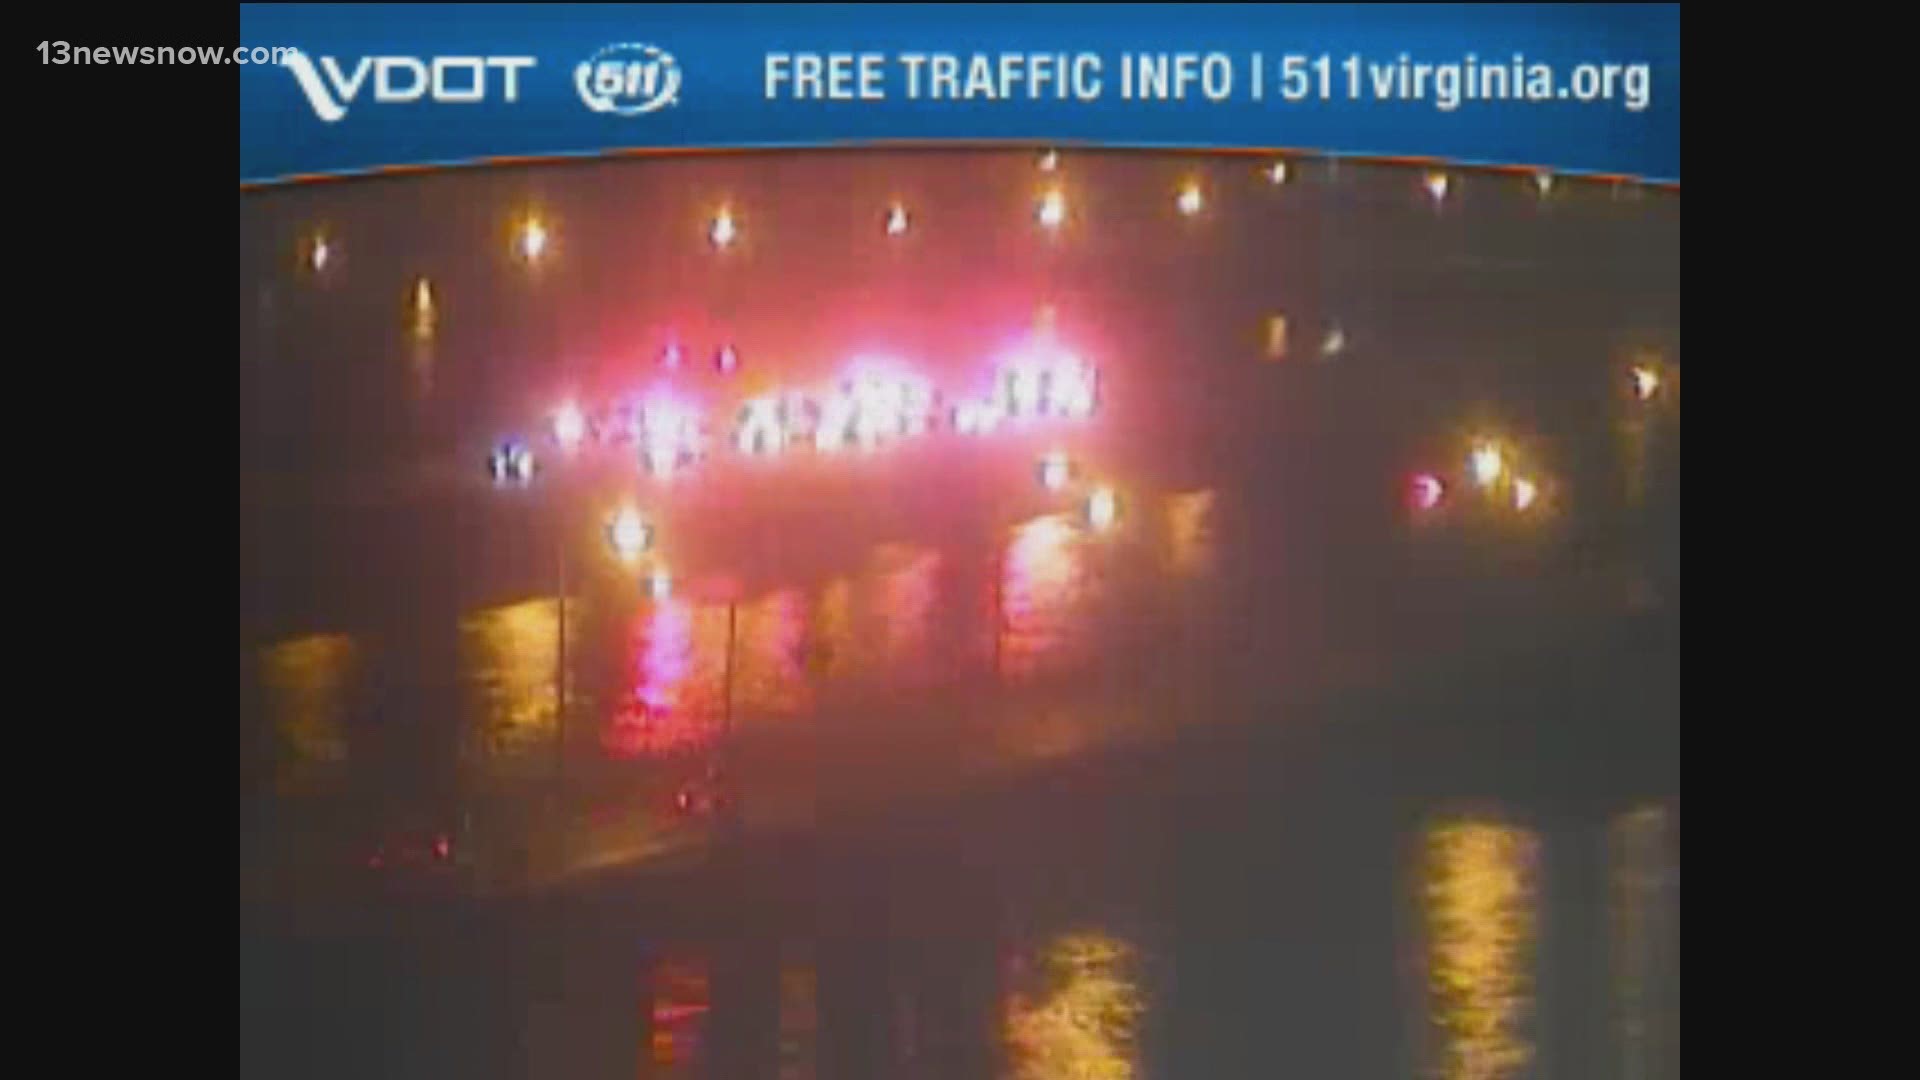 State troopers said the driver of a Mercedes Benz left the crash scene on Interstate 64 at the HRBT. There were injuries as a result of the crash.